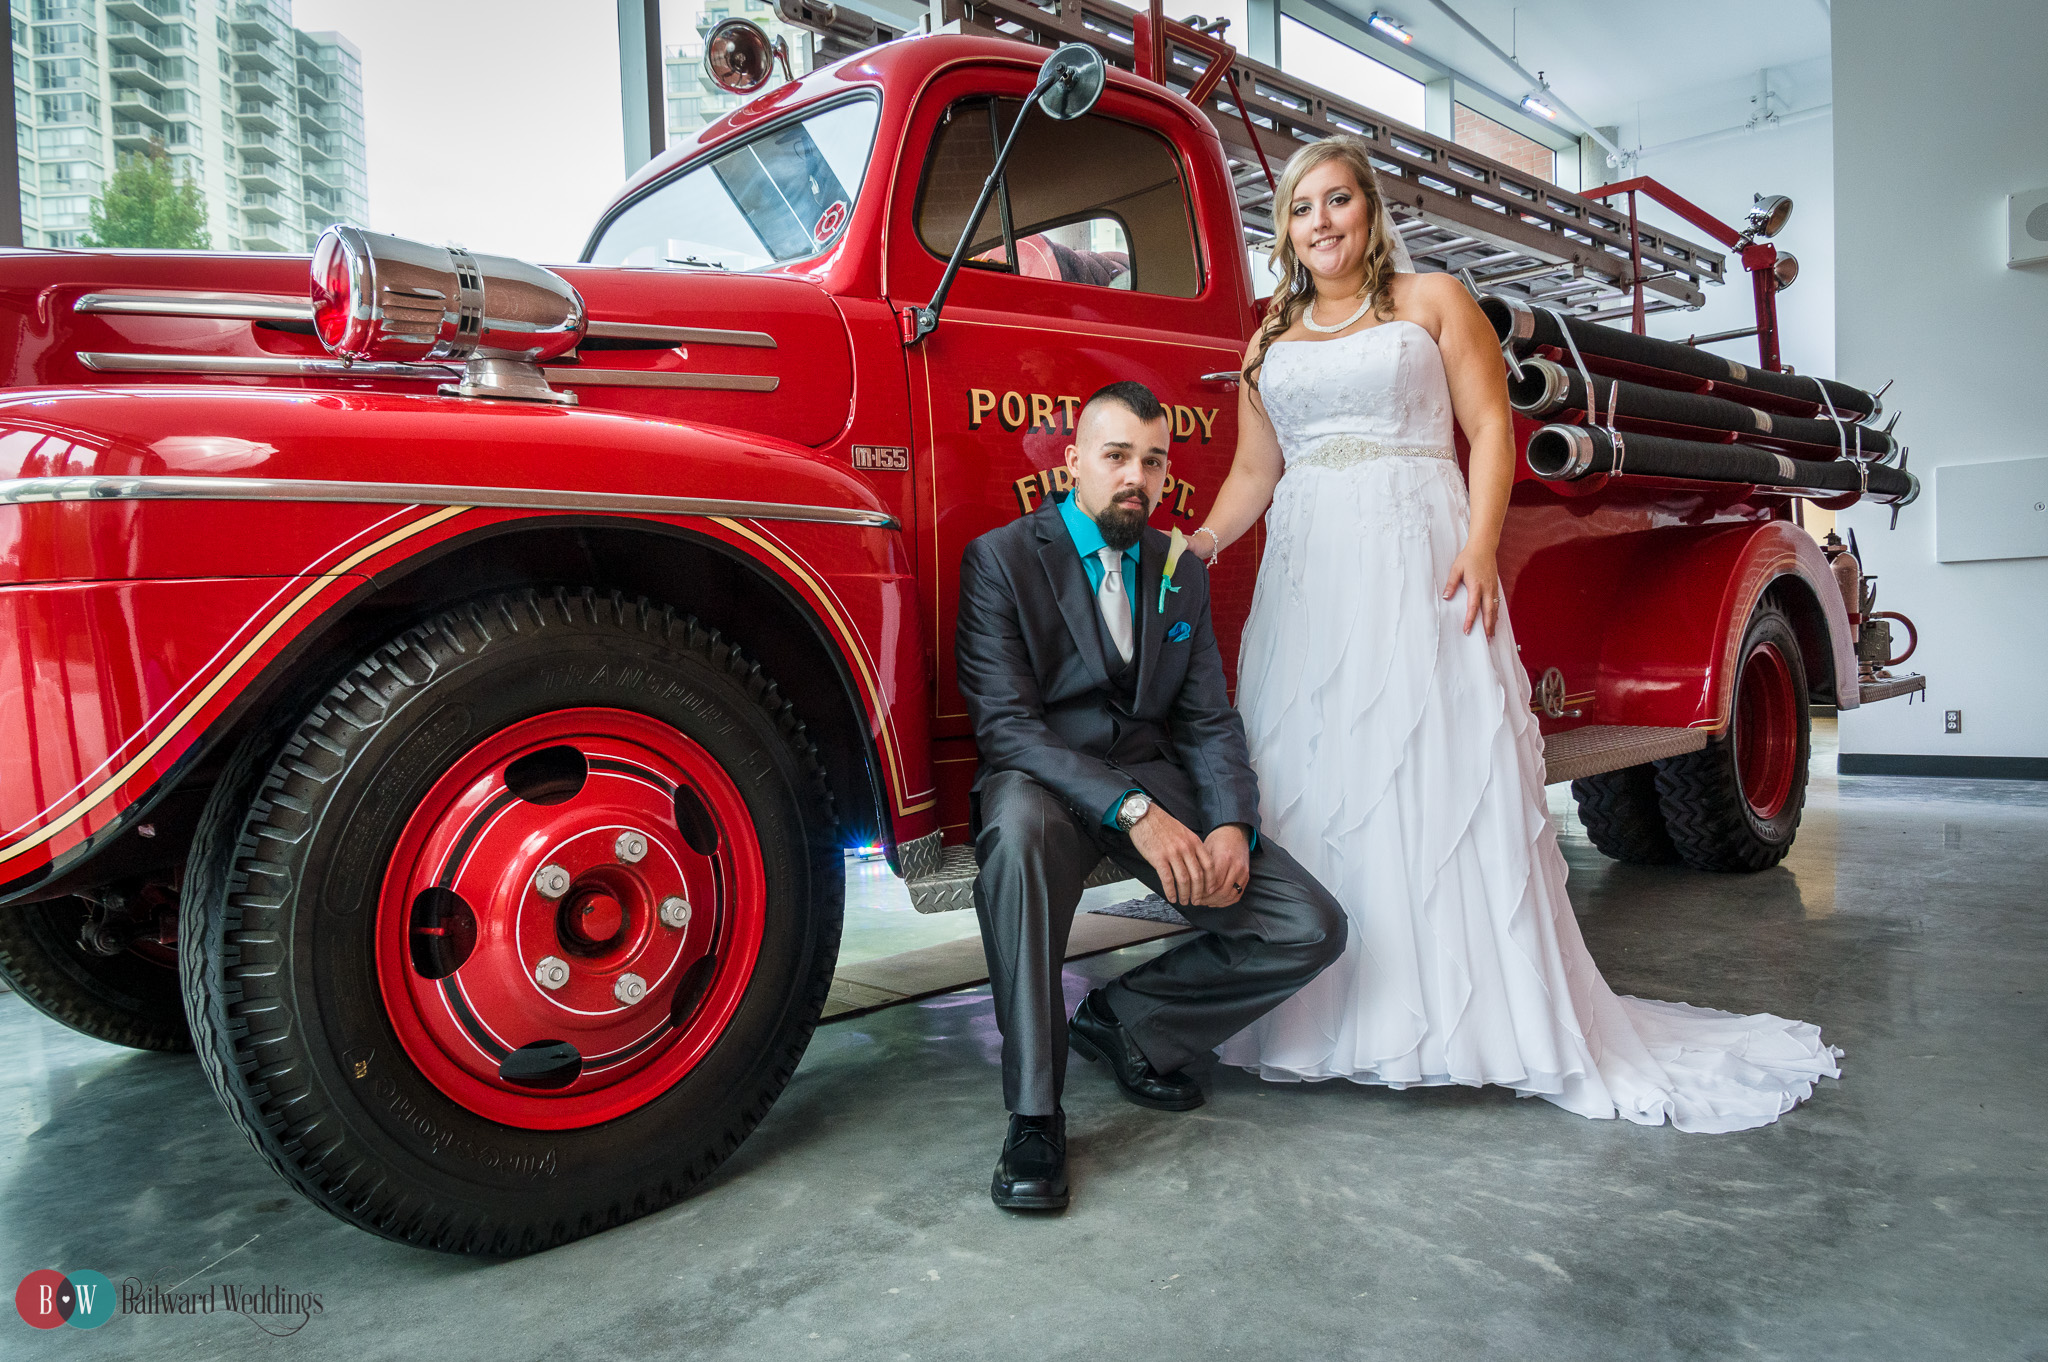 Bride and Groom posing beside red fire truck